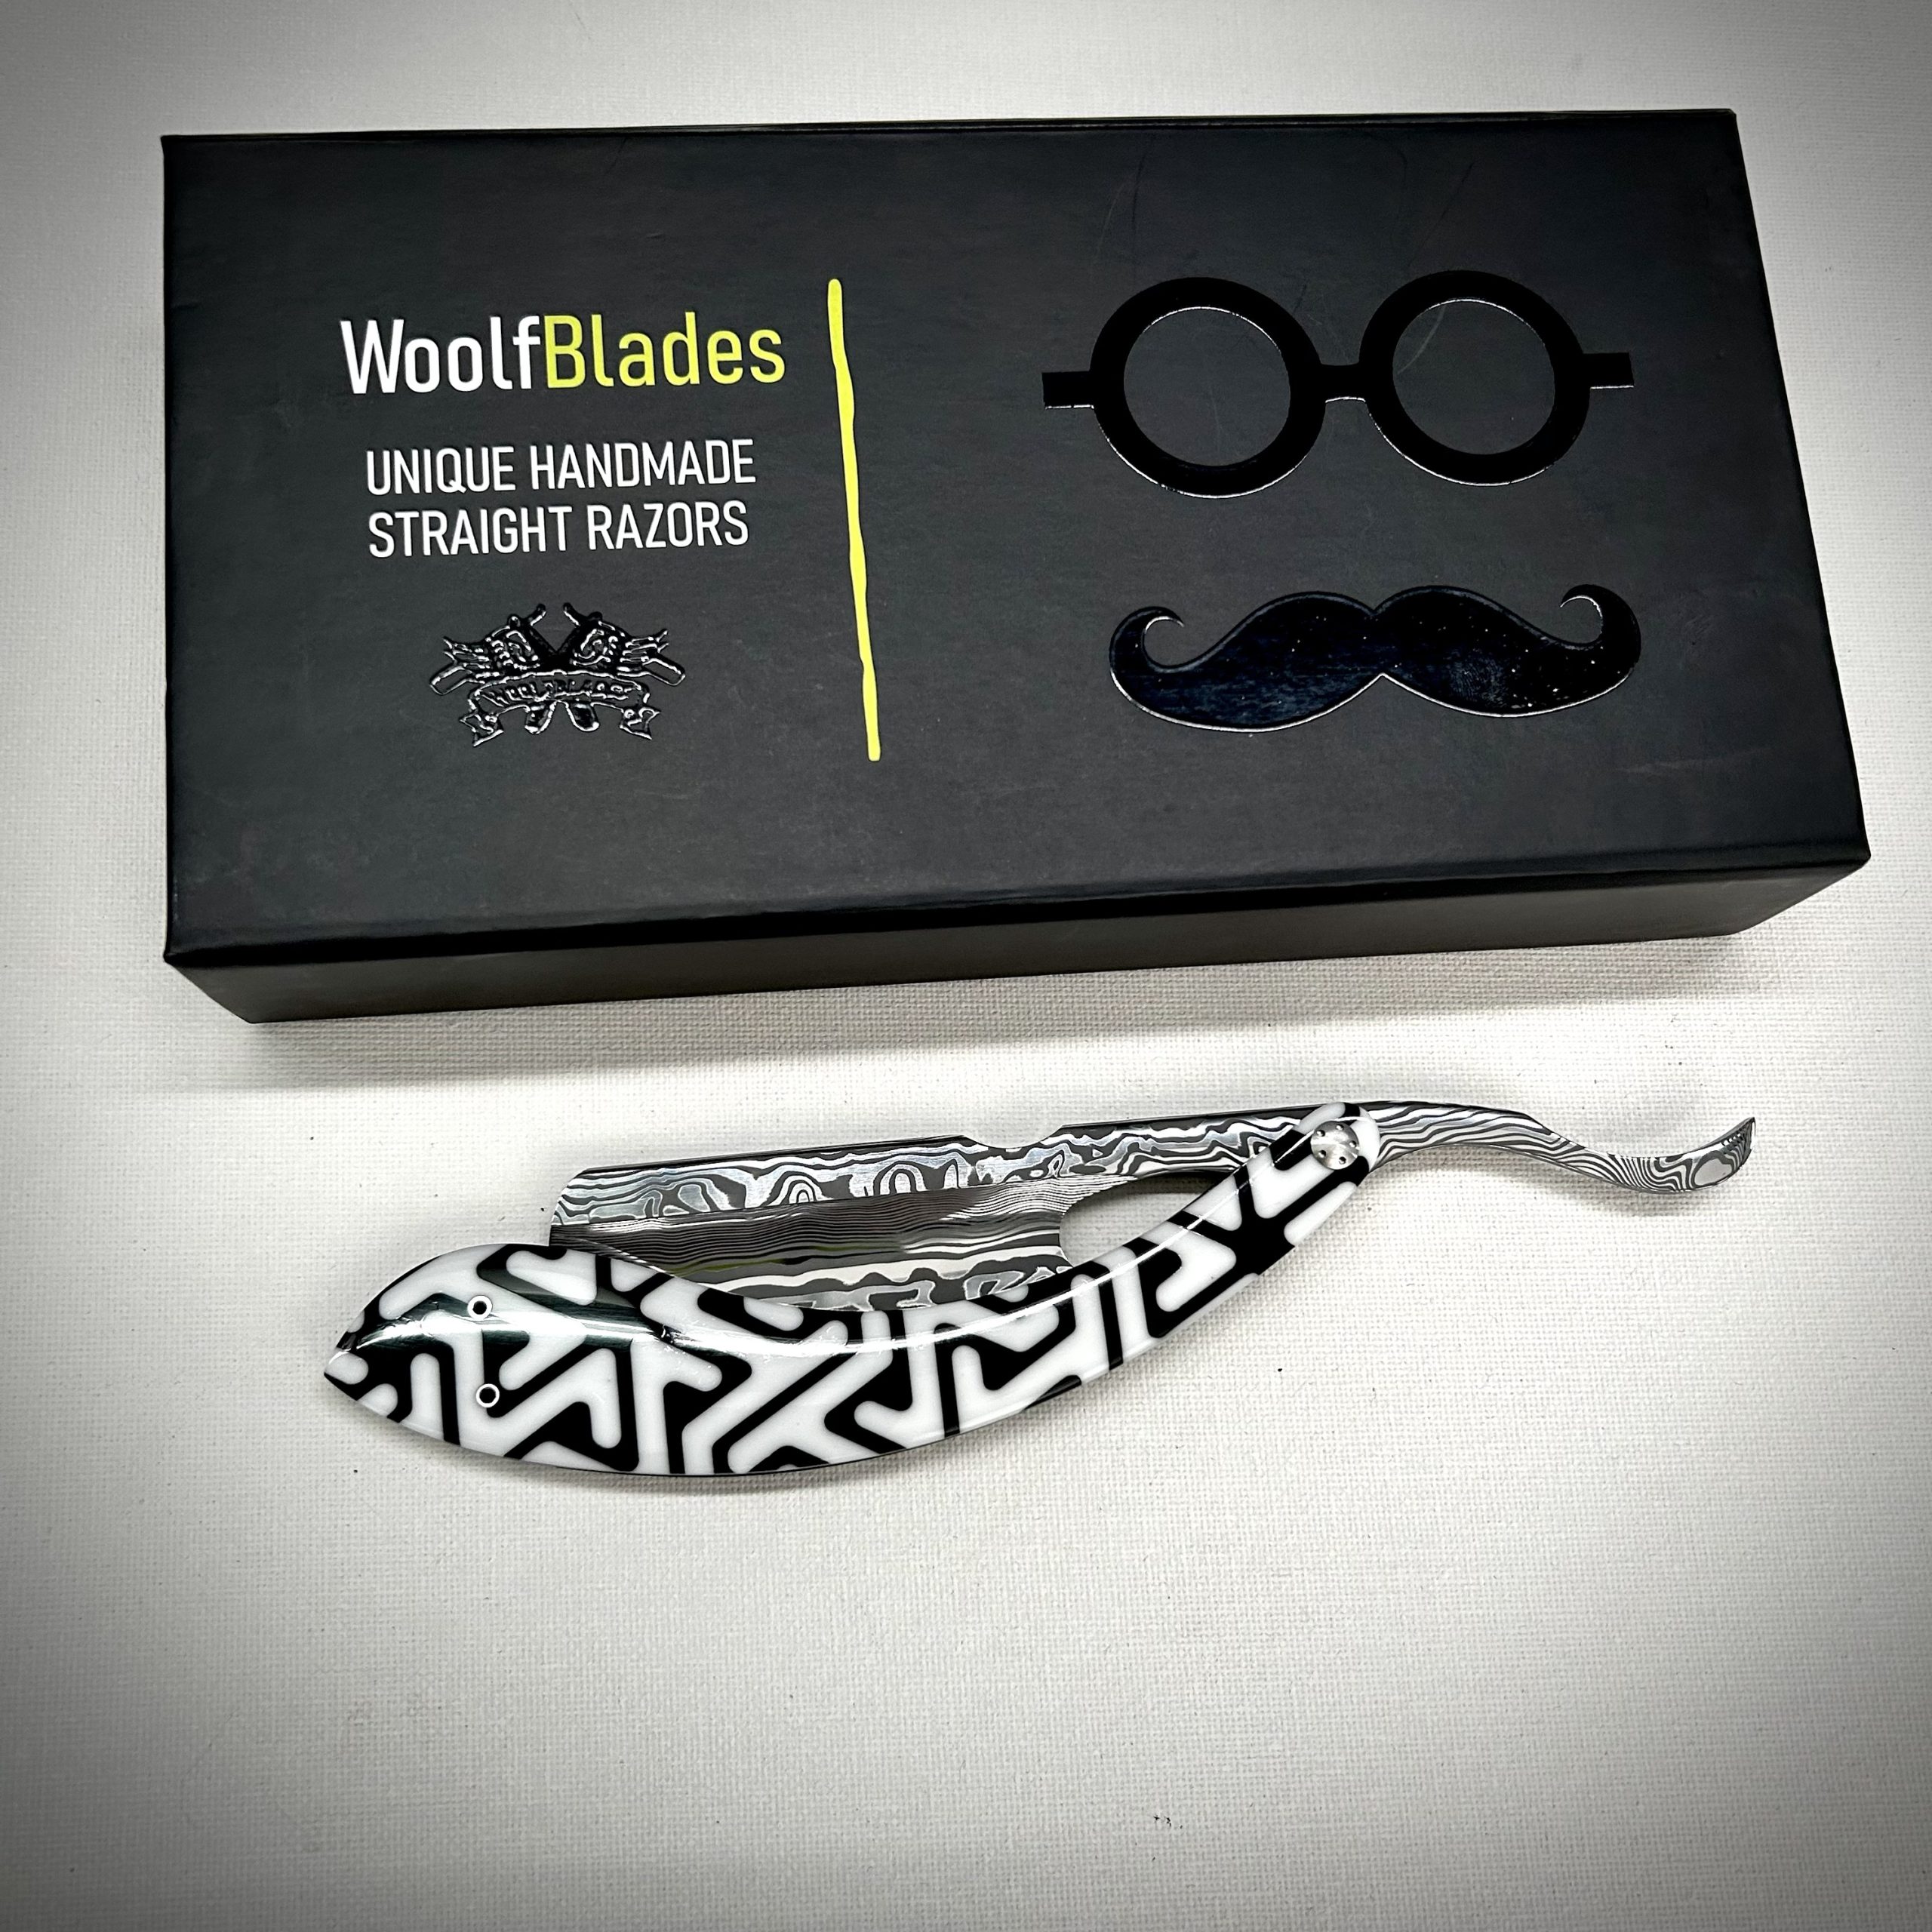 Woolfblades 354 Custom Made in a Vinland Damasteel razor ,And the scales are made in a Voodoo resin with carbon fibre inlays